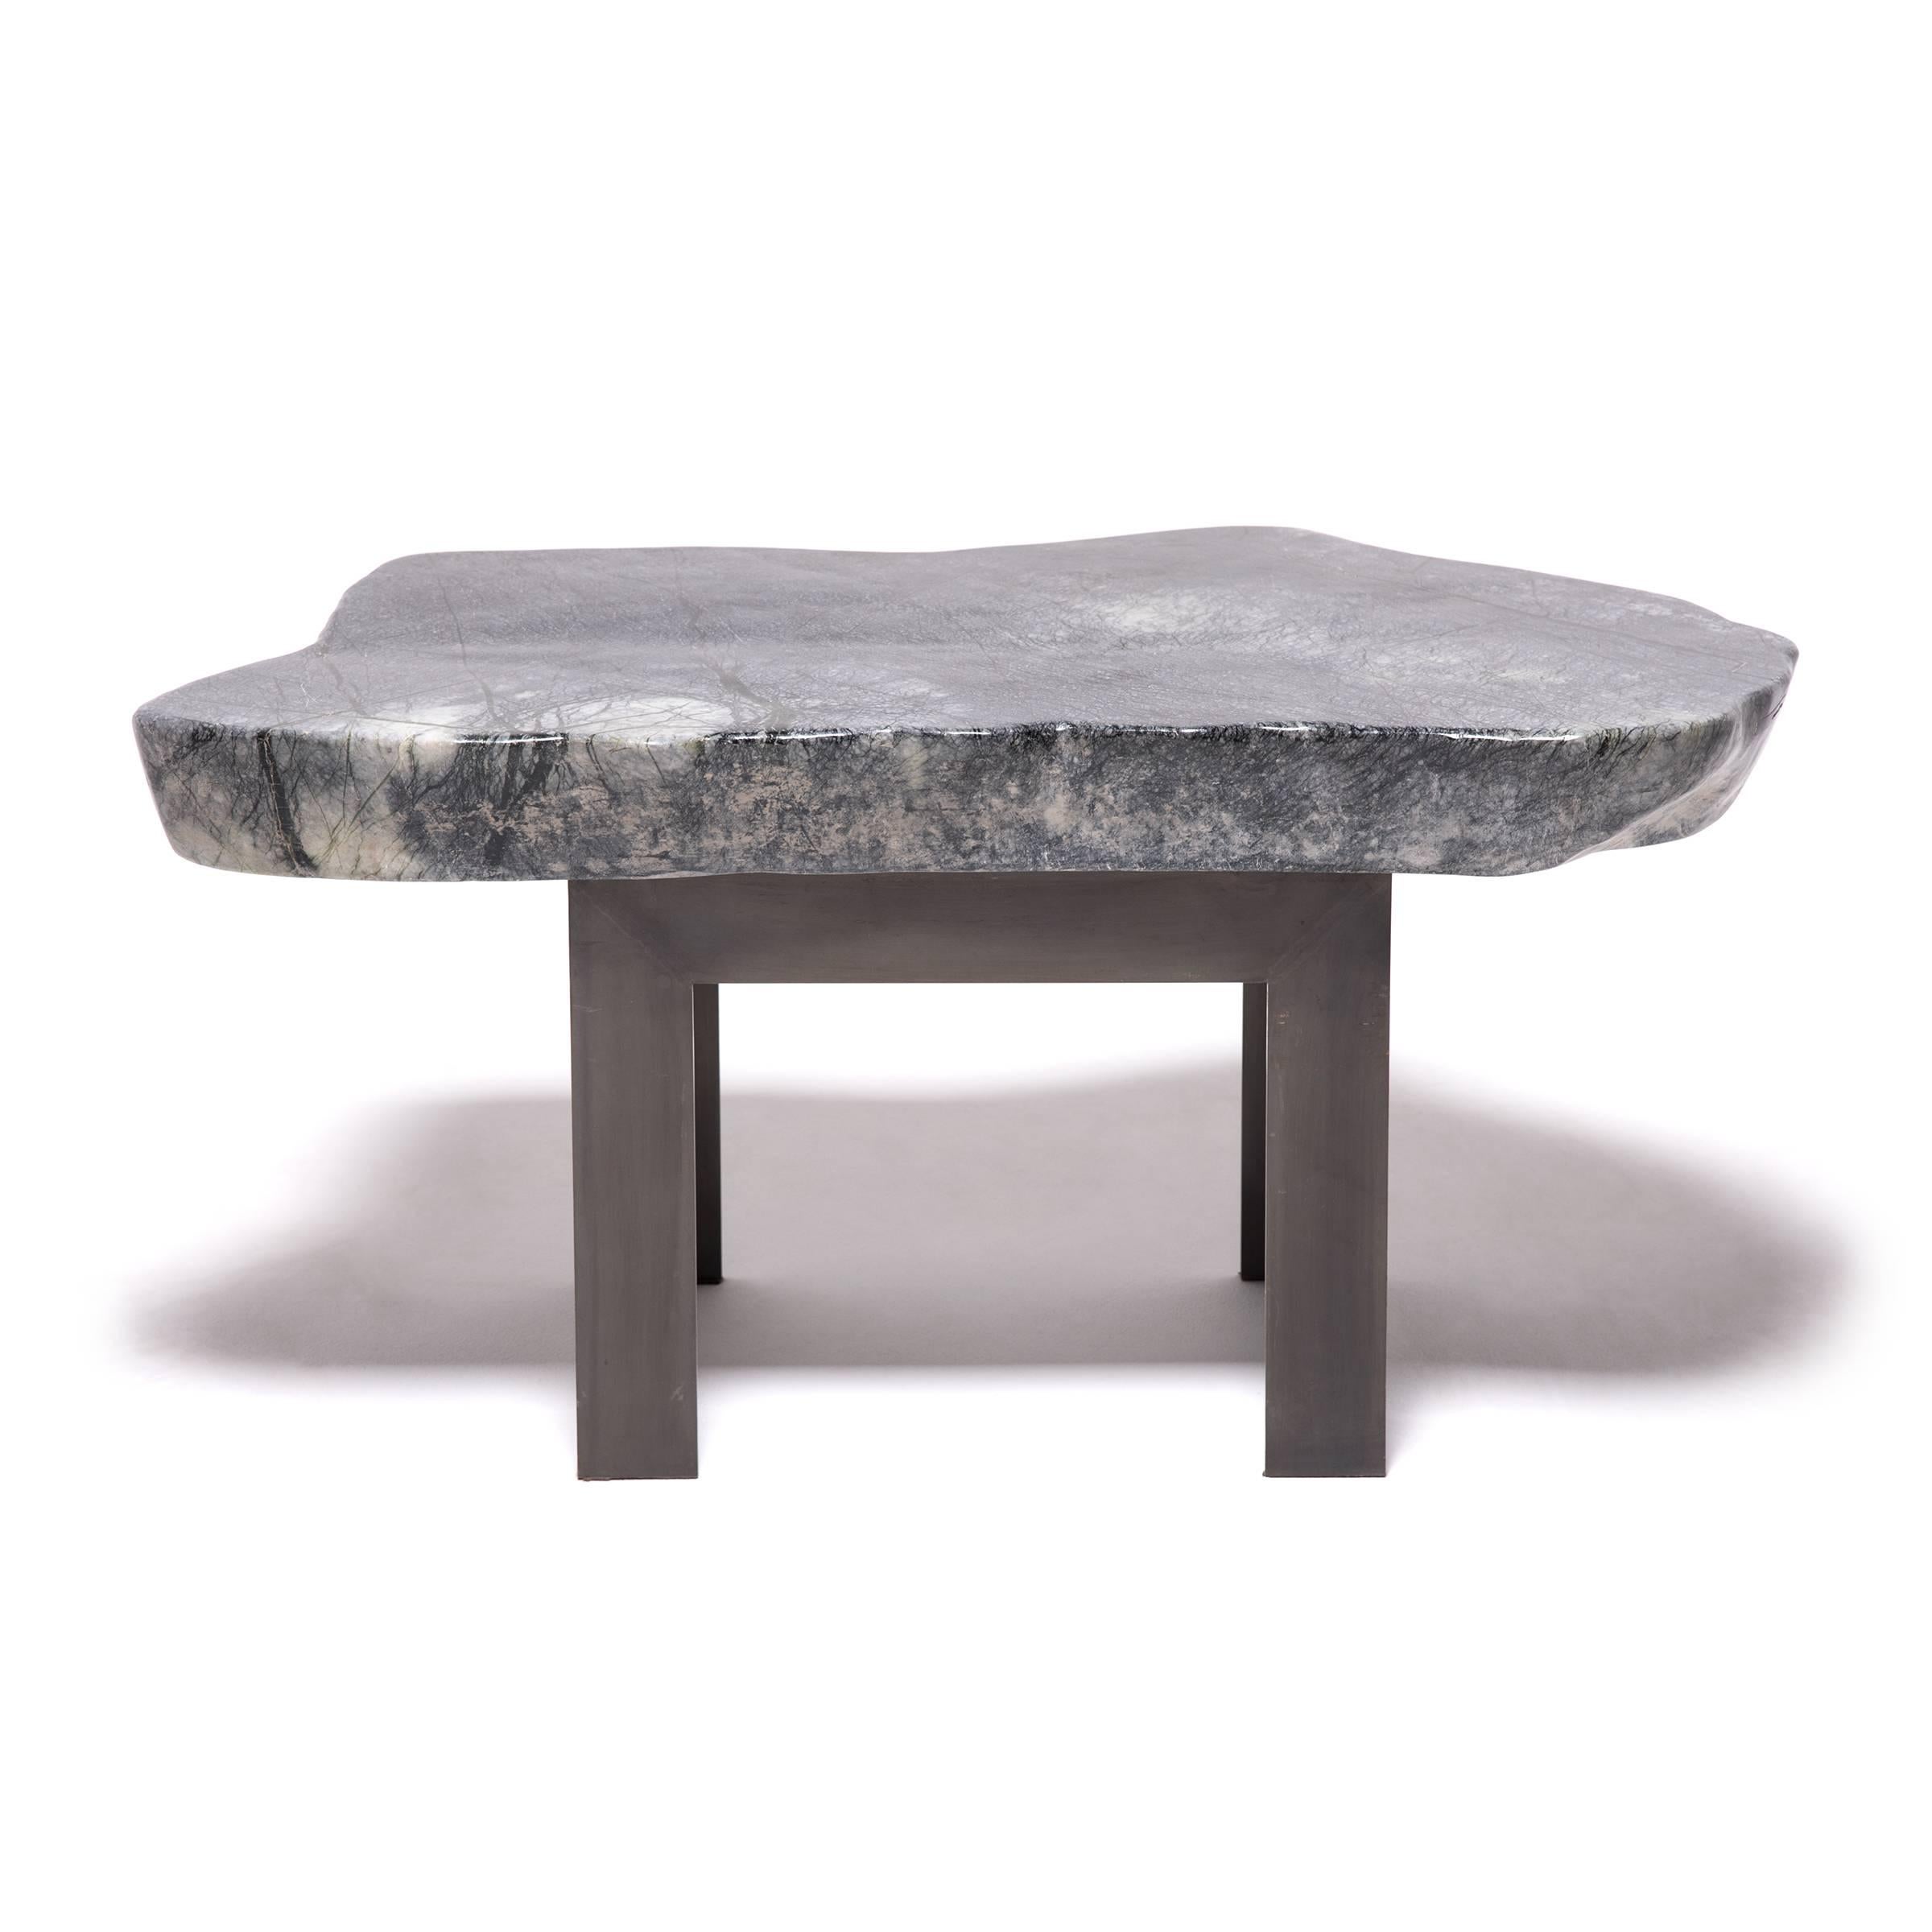 Steel Chinese Meditation Stone Top Table